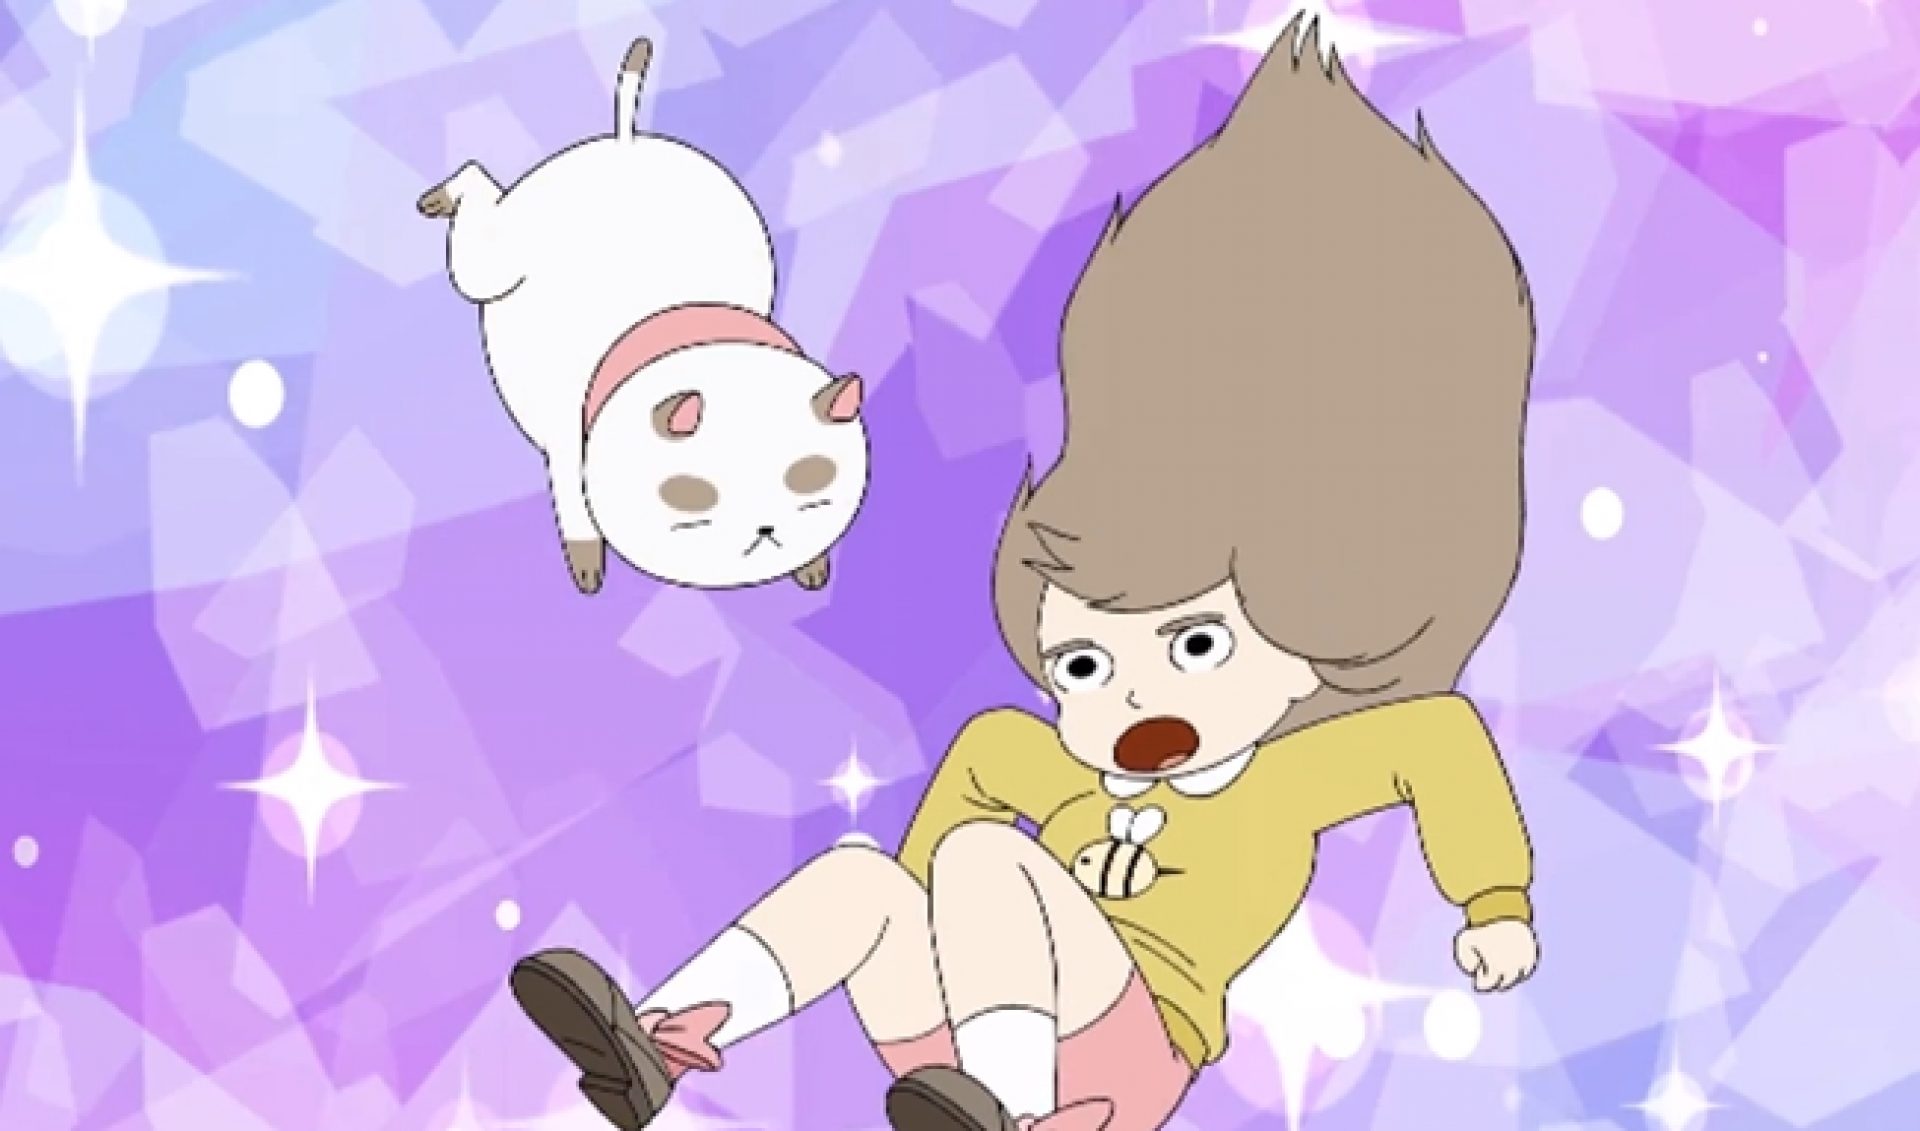 Cartoon Hangover’s ‘Bee and Puppycat’ Seeks $600,000 For Full Series